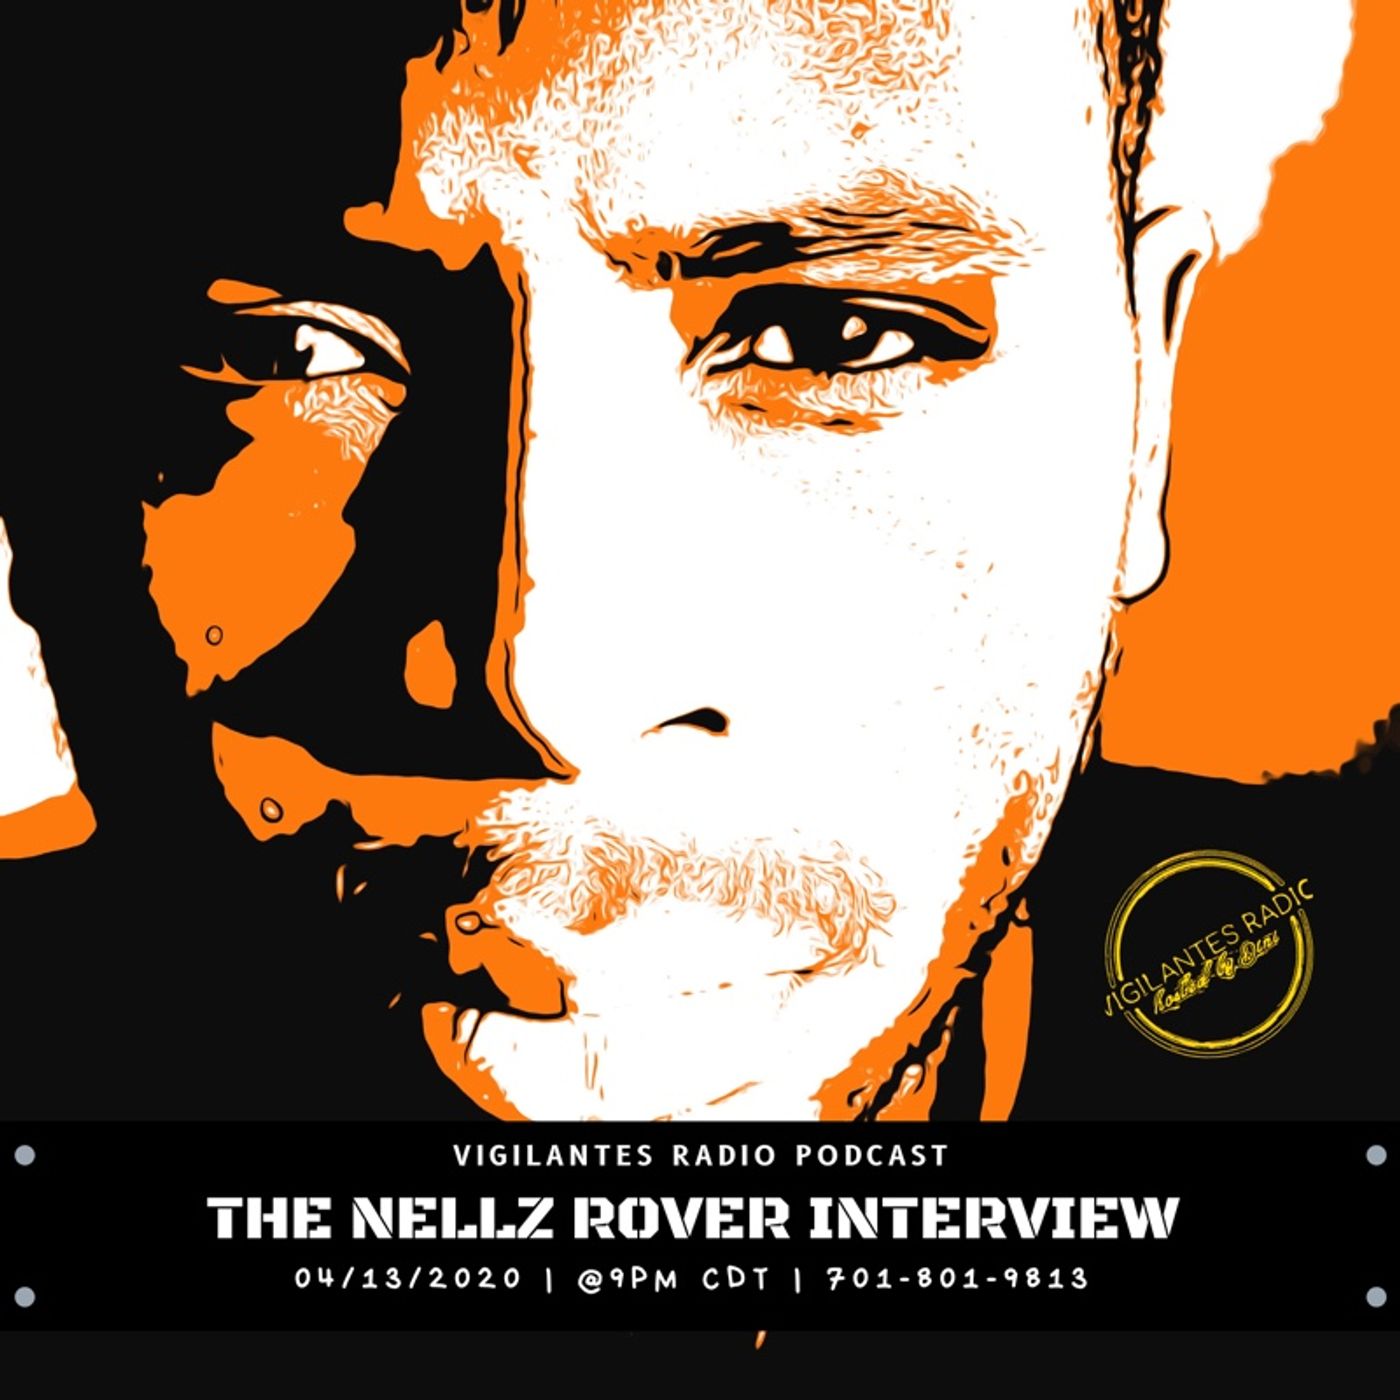 The Nellz Rover Interview. Image